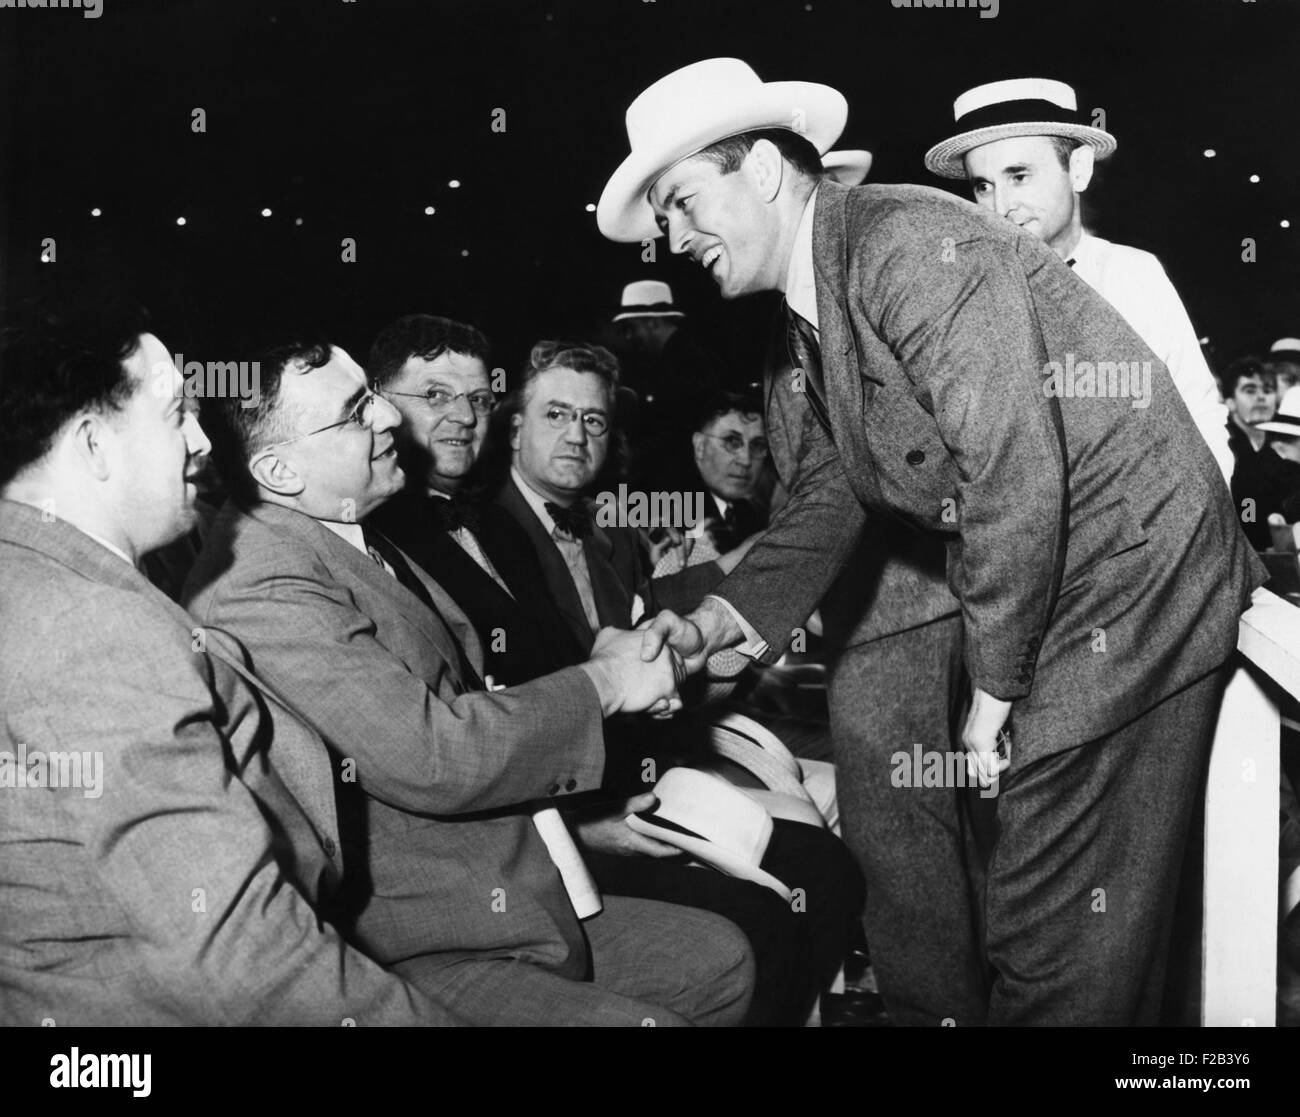 Two prominent citizens were at the ringside in the Cleveland Stadium. Gene Tunney, the retired undefeated heavyweight champion and Mayor Anton J. Cermak of Chicago shake hands. July 3, 1931. Cermak was shot and fatally wounded by Giuseppe Zangara, in an assassination attempt on FDR on Feb. 15, 1933. - (CSU 2015 5 150) Stock Photo